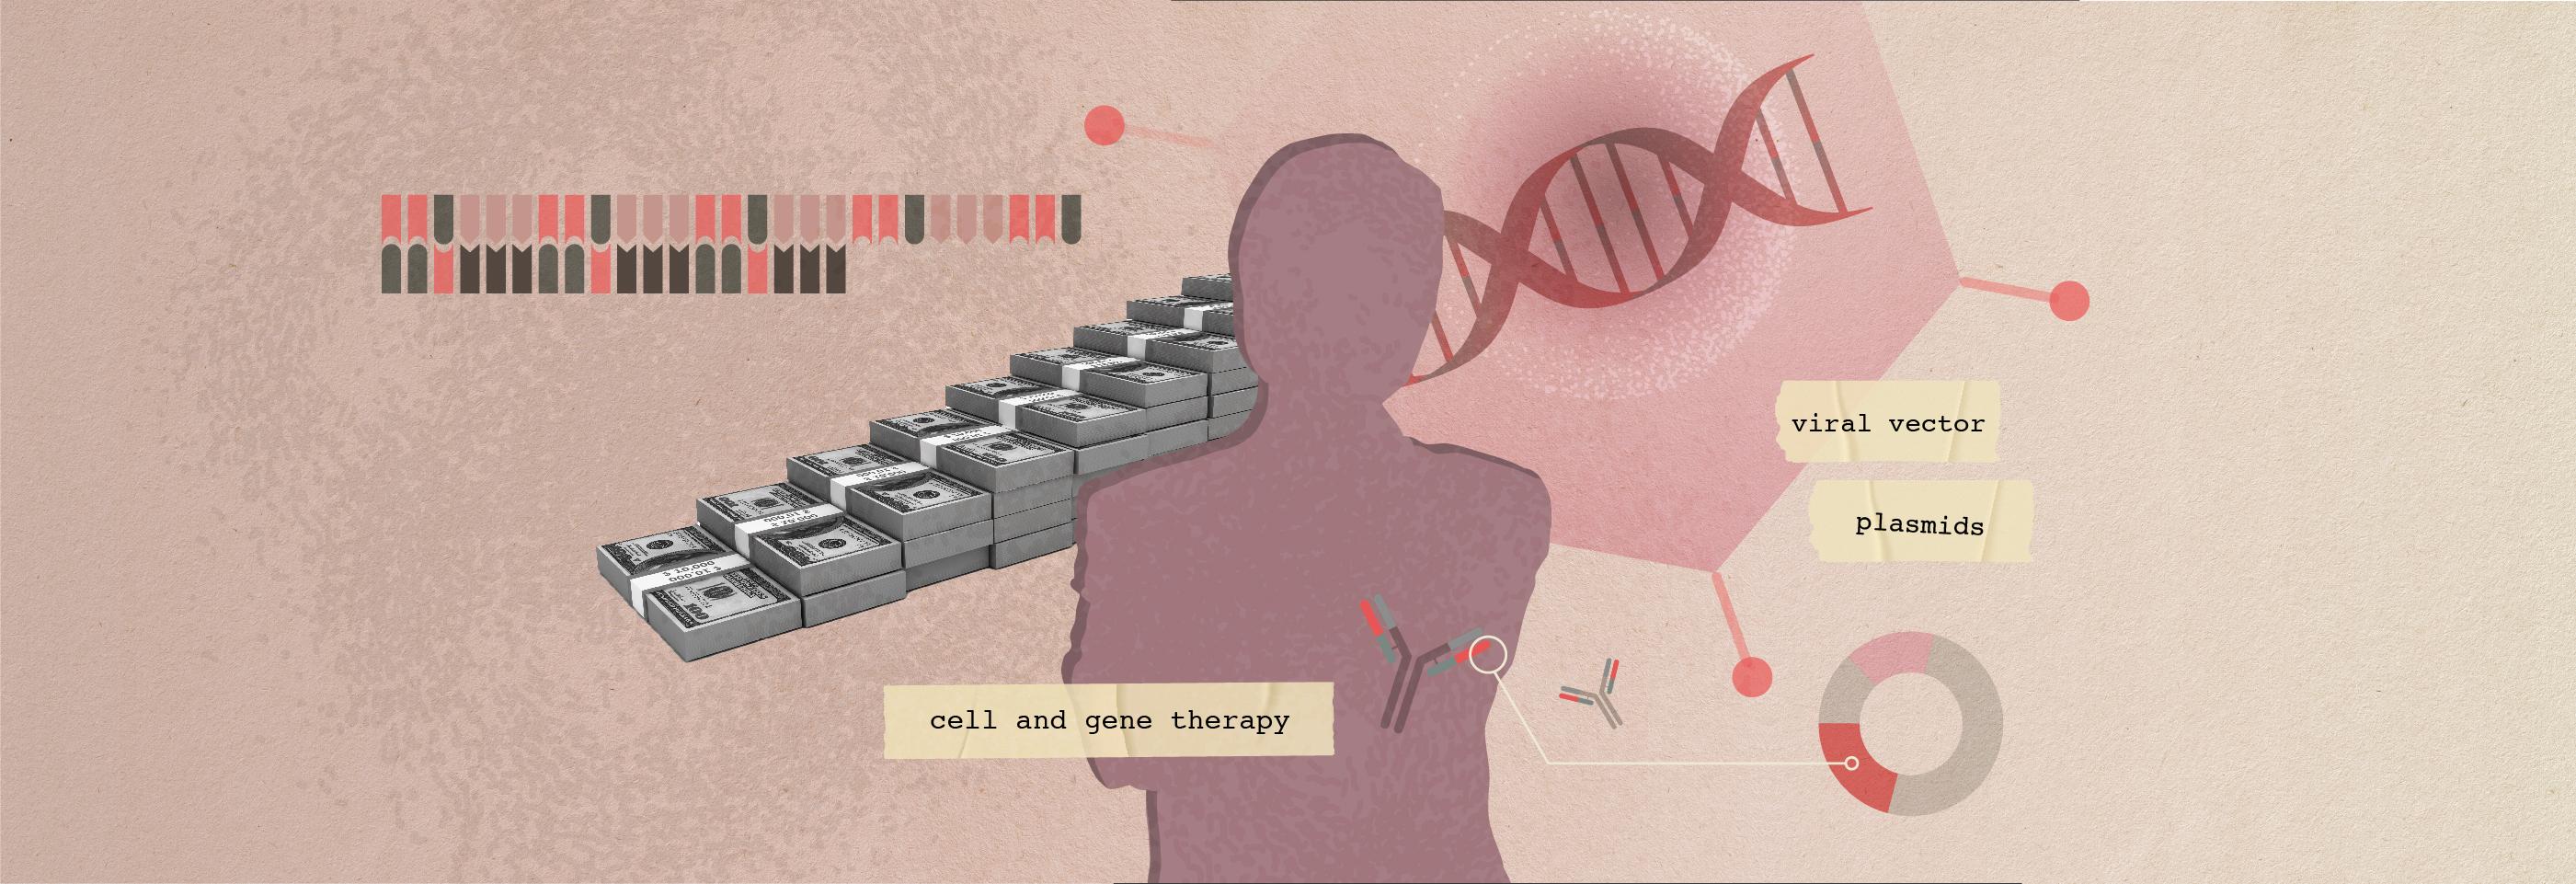 Why the Big Shifts in Gene Therapy Investments? It’s Late in the Game